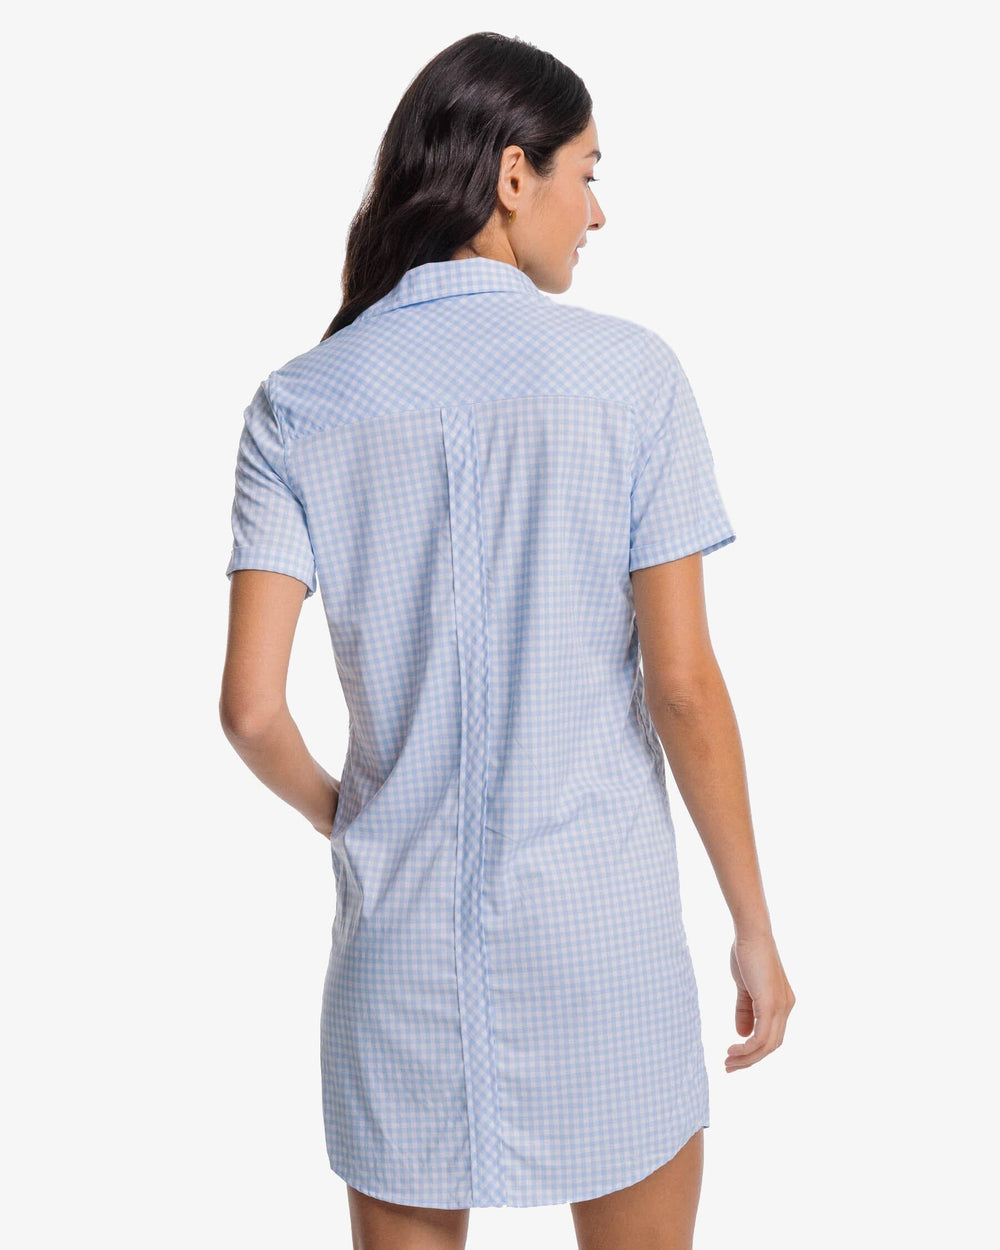 The back view of the Southern Tide Kamryn brrr°® Intercoastal Gingham Dress by Southern Tide - Sky Blue